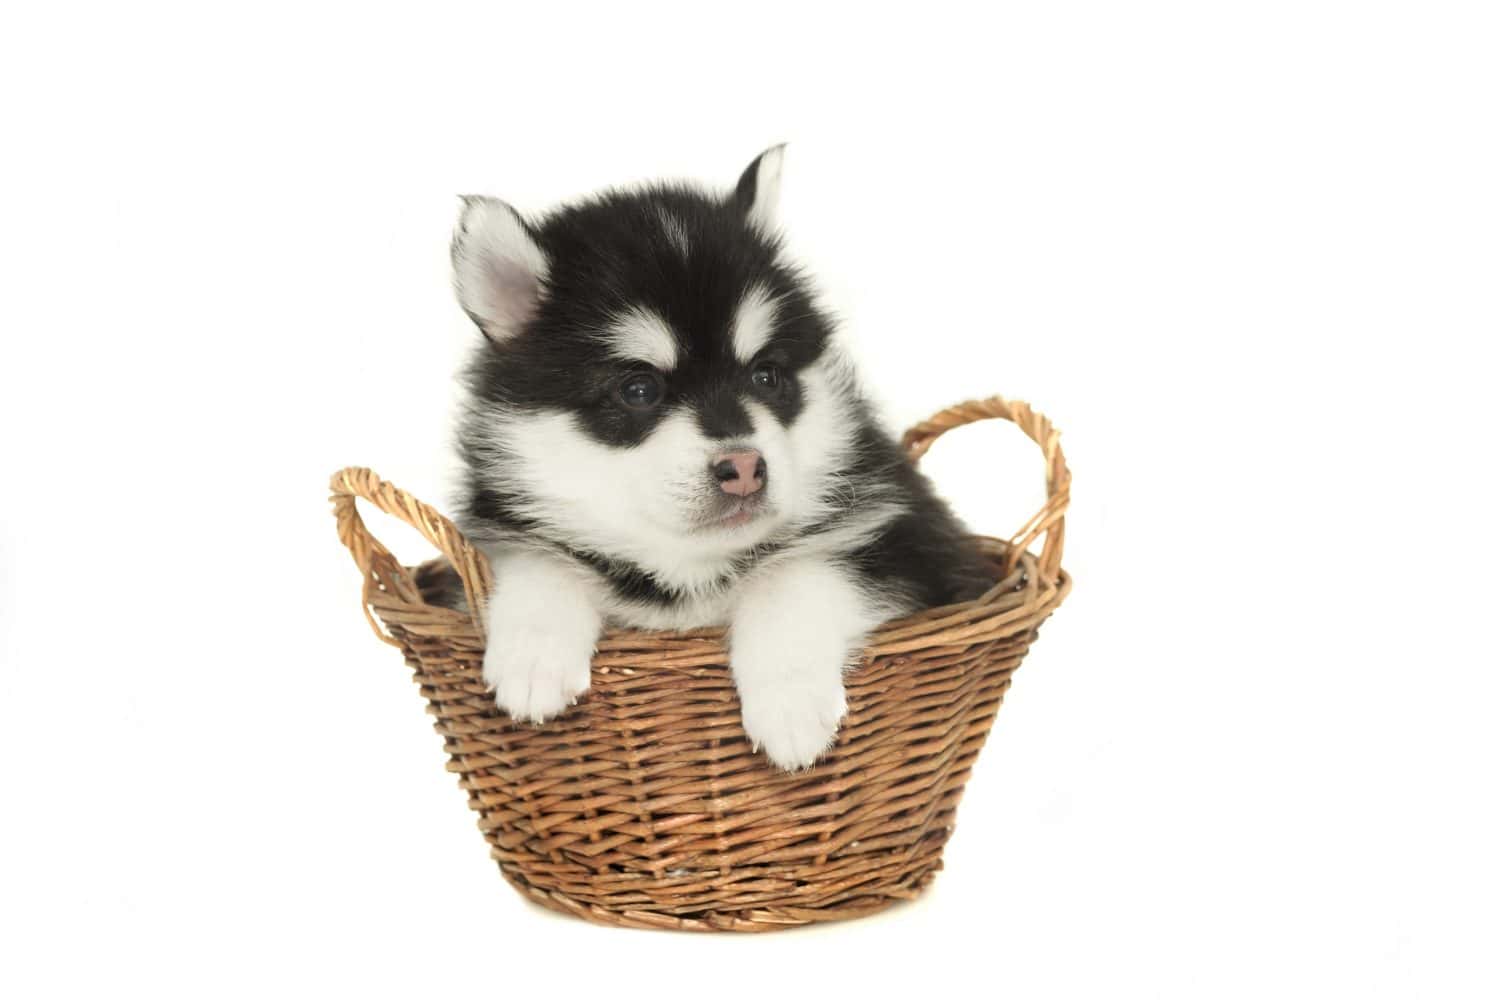 Funny Playful Small One Month Designer Black White Husky Or Pomsky Puppy Doze In The Wicker Basket Isolated On White Background.